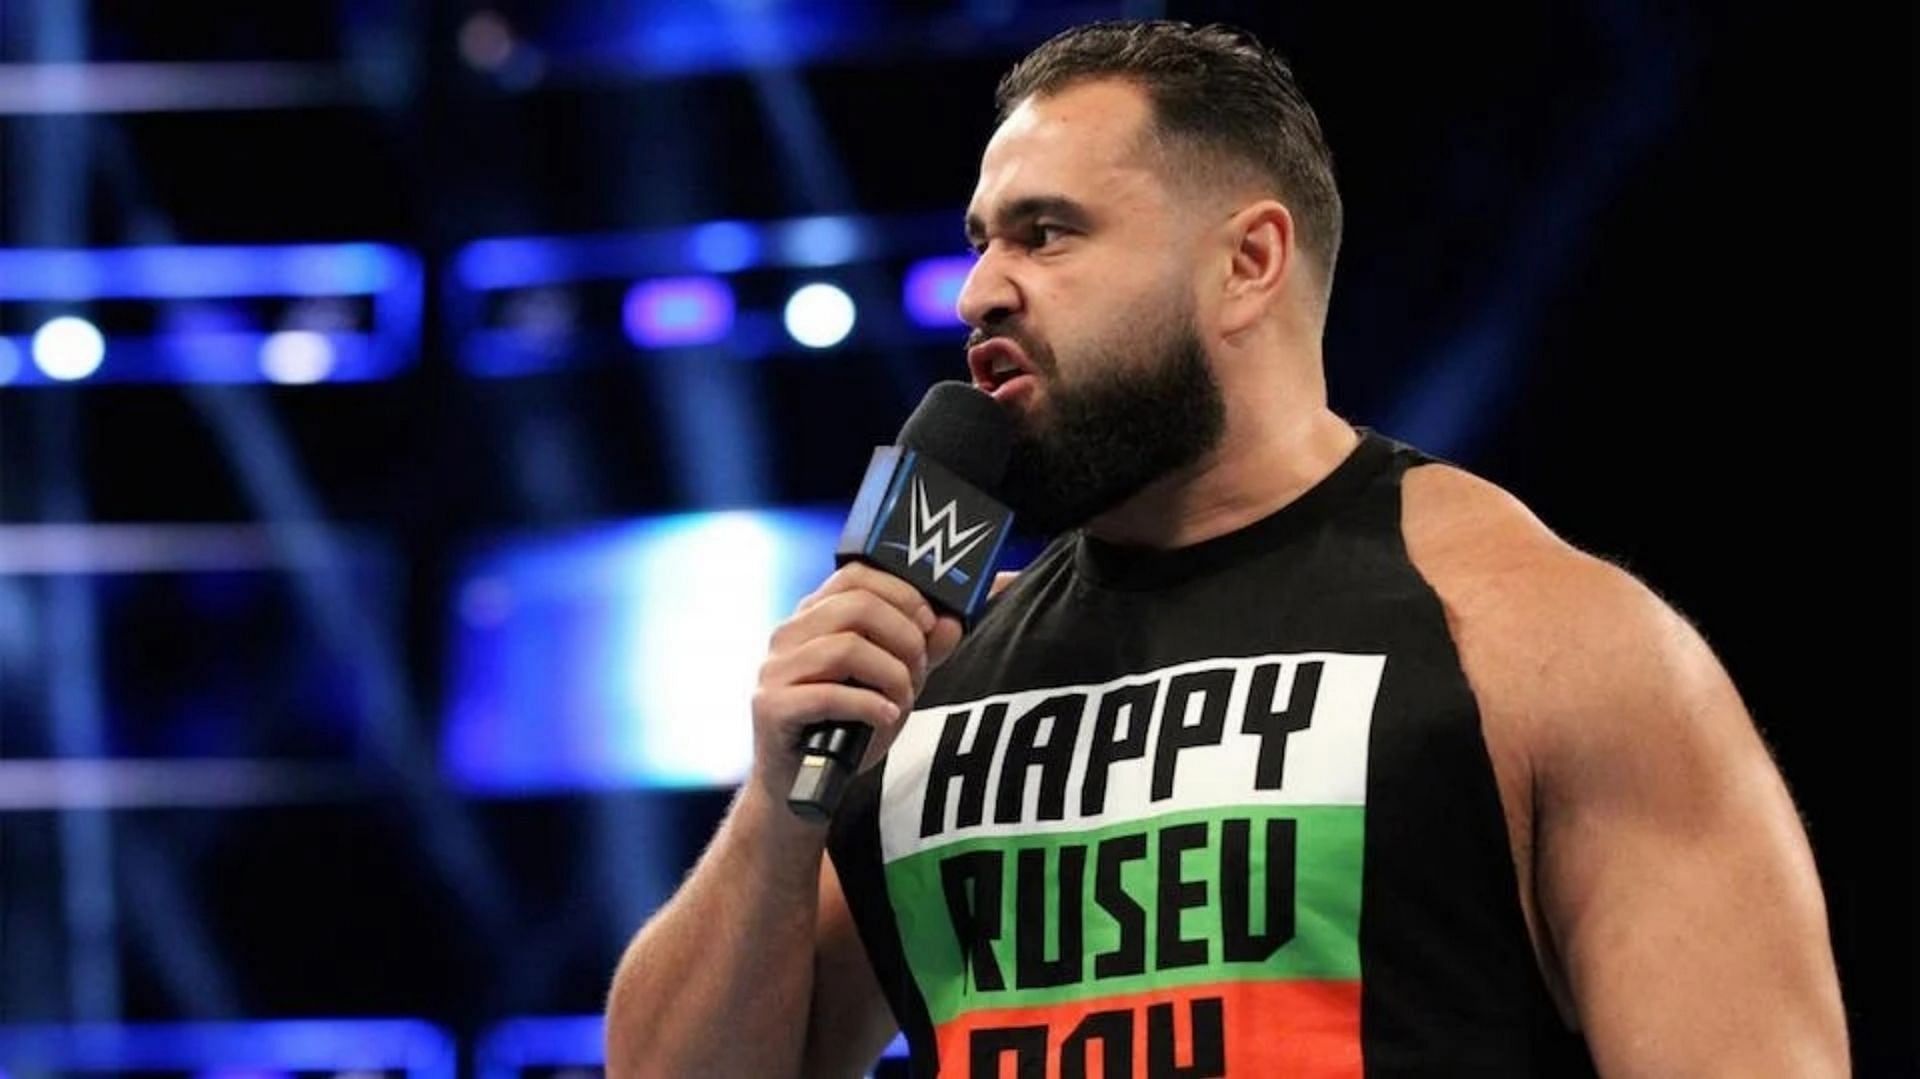 WWE saw the rise of Rusev Day in 2017